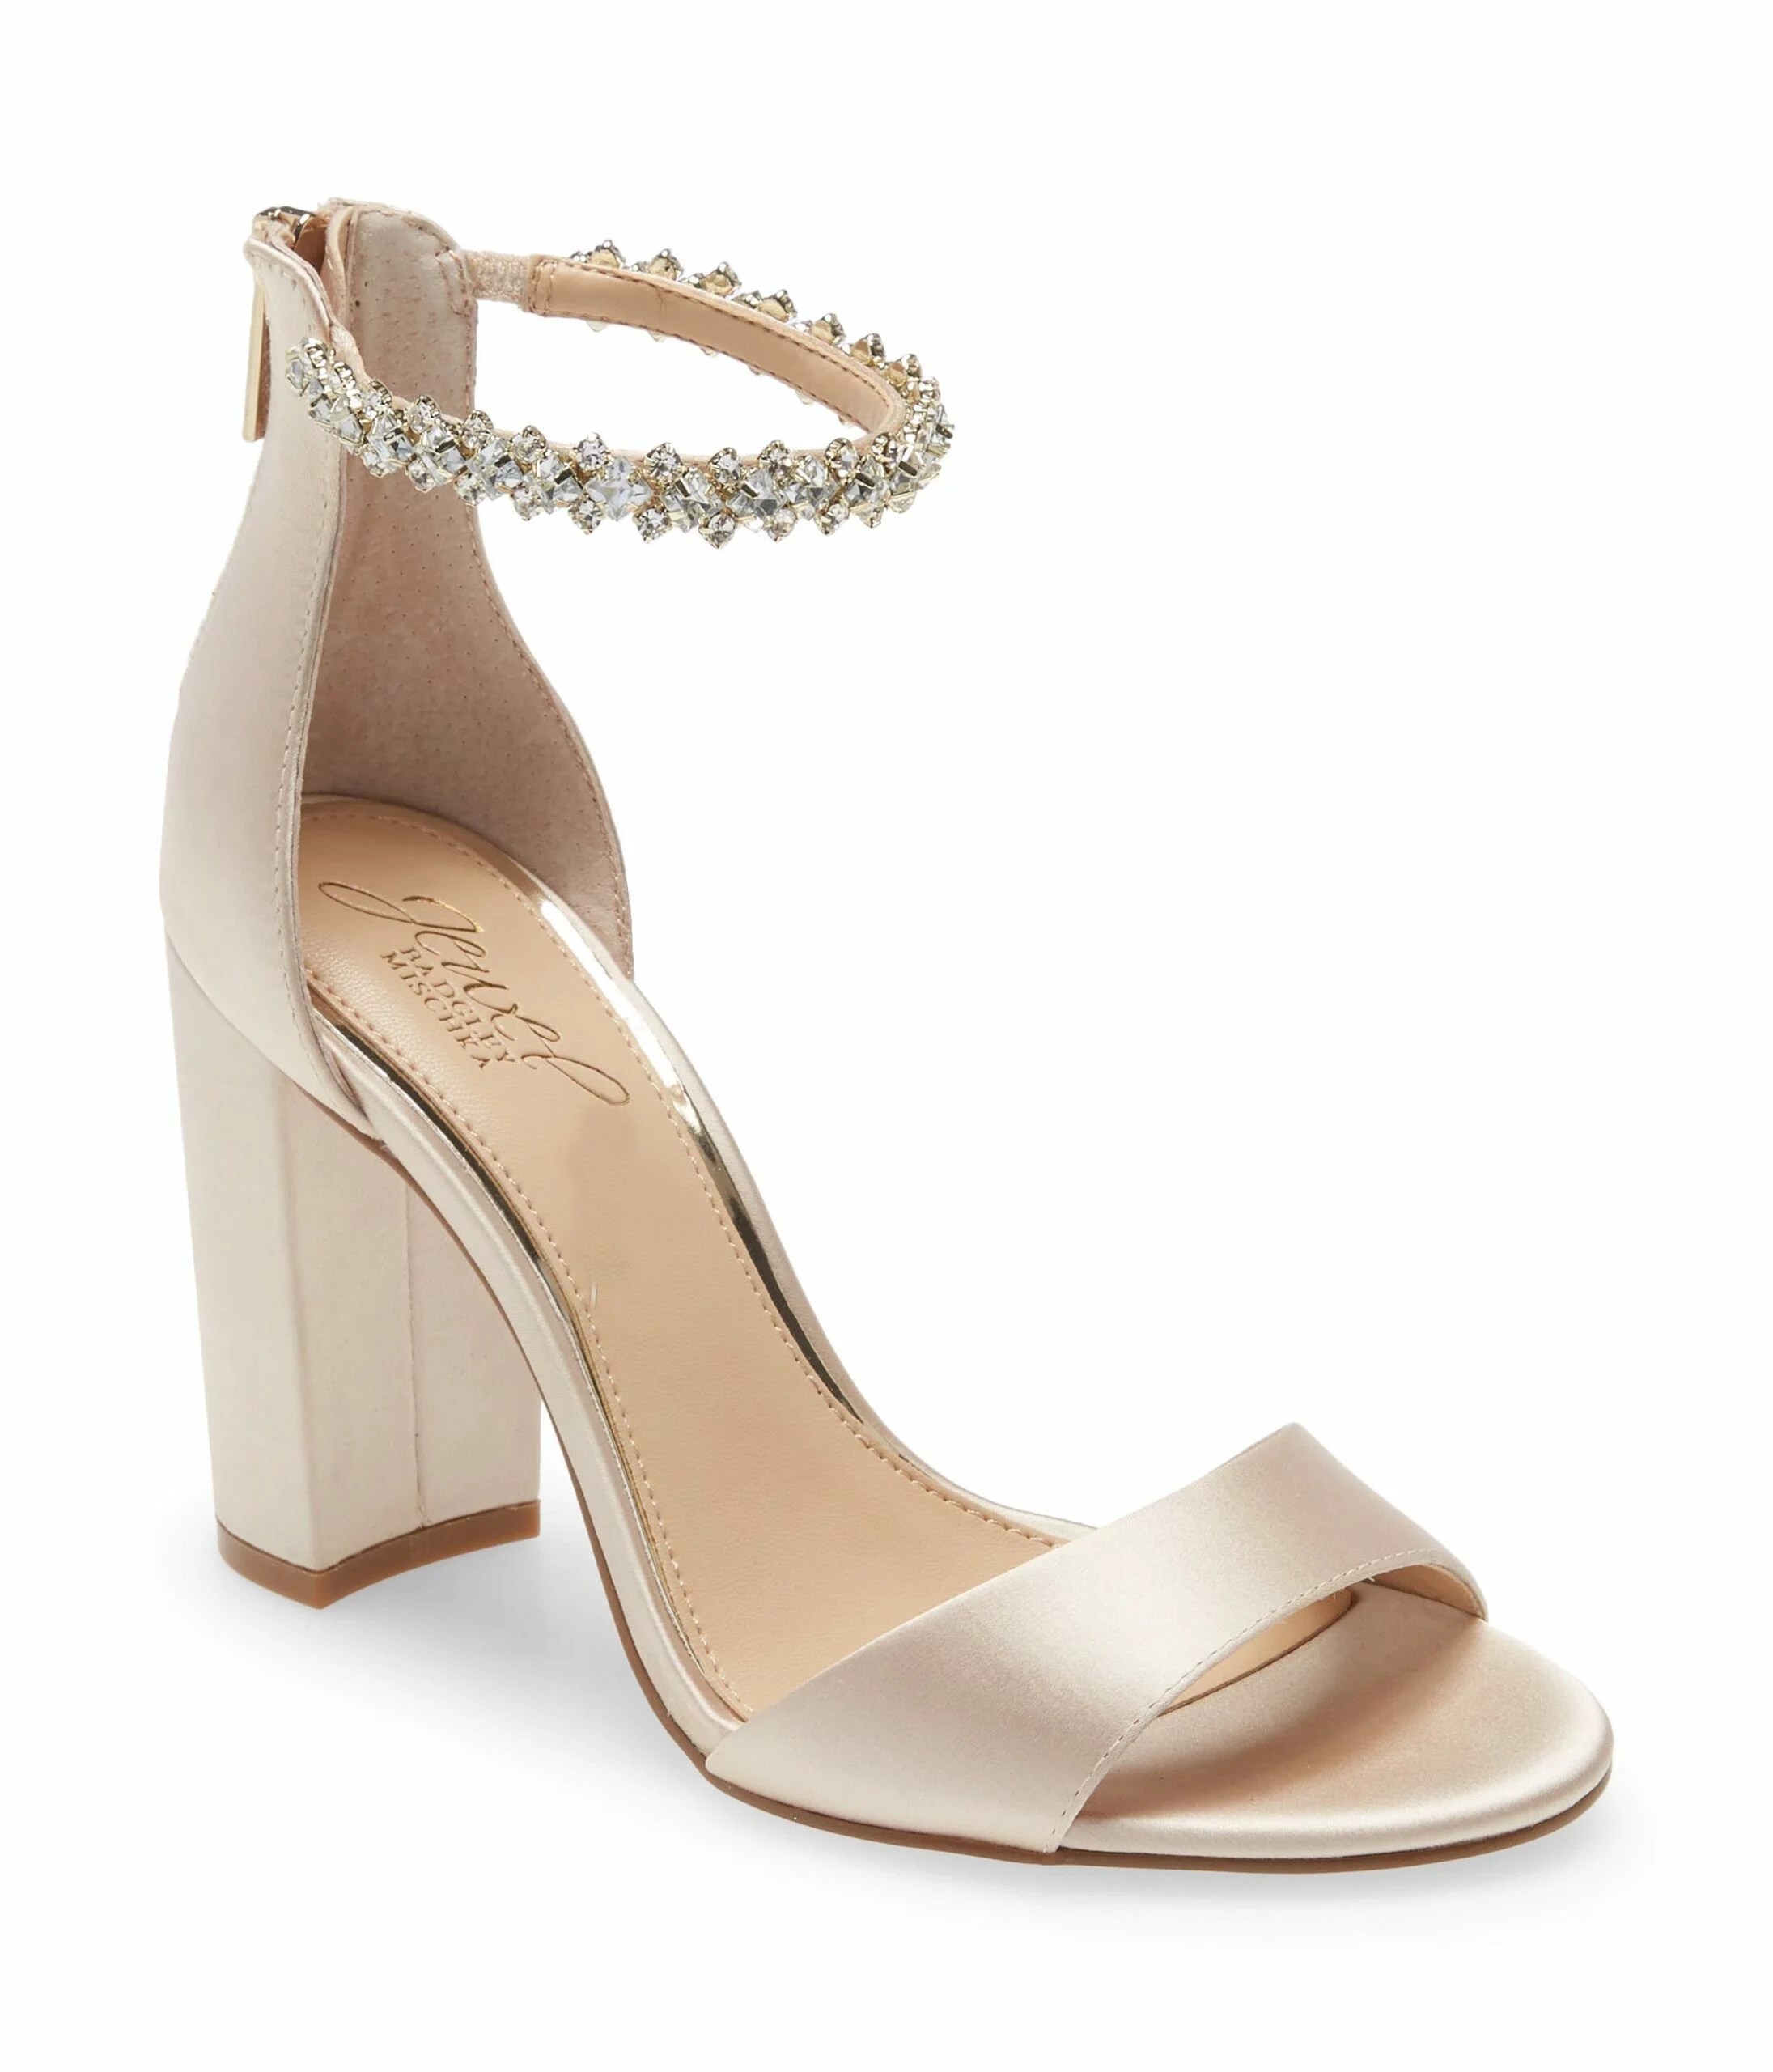 Badgley Mischka Collection Louise Ankle Strap Sandal